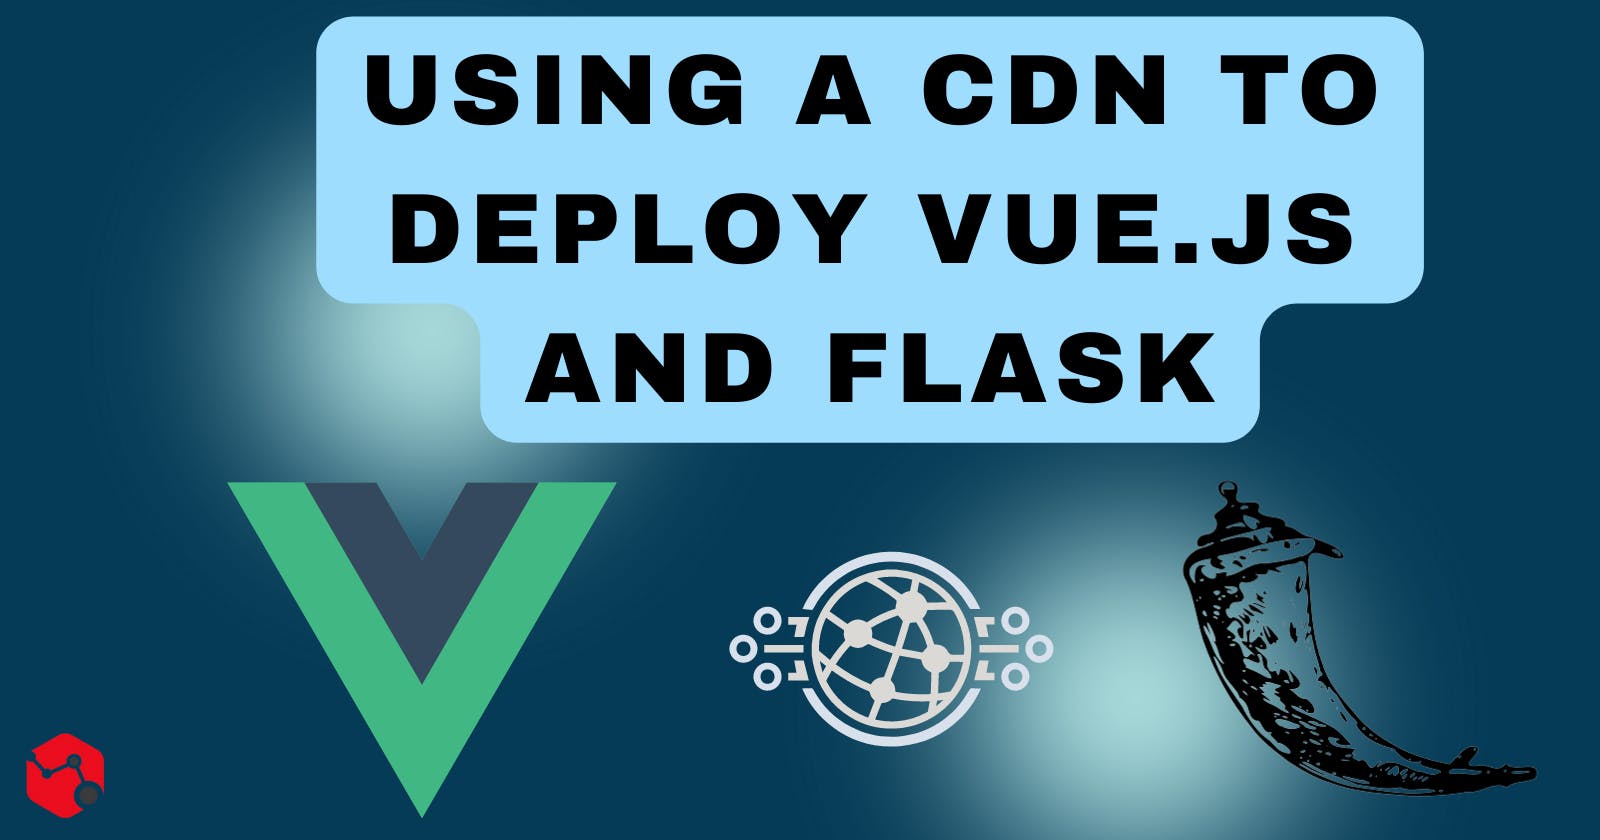 Using a CDN to Deploy Vue.js and Flask